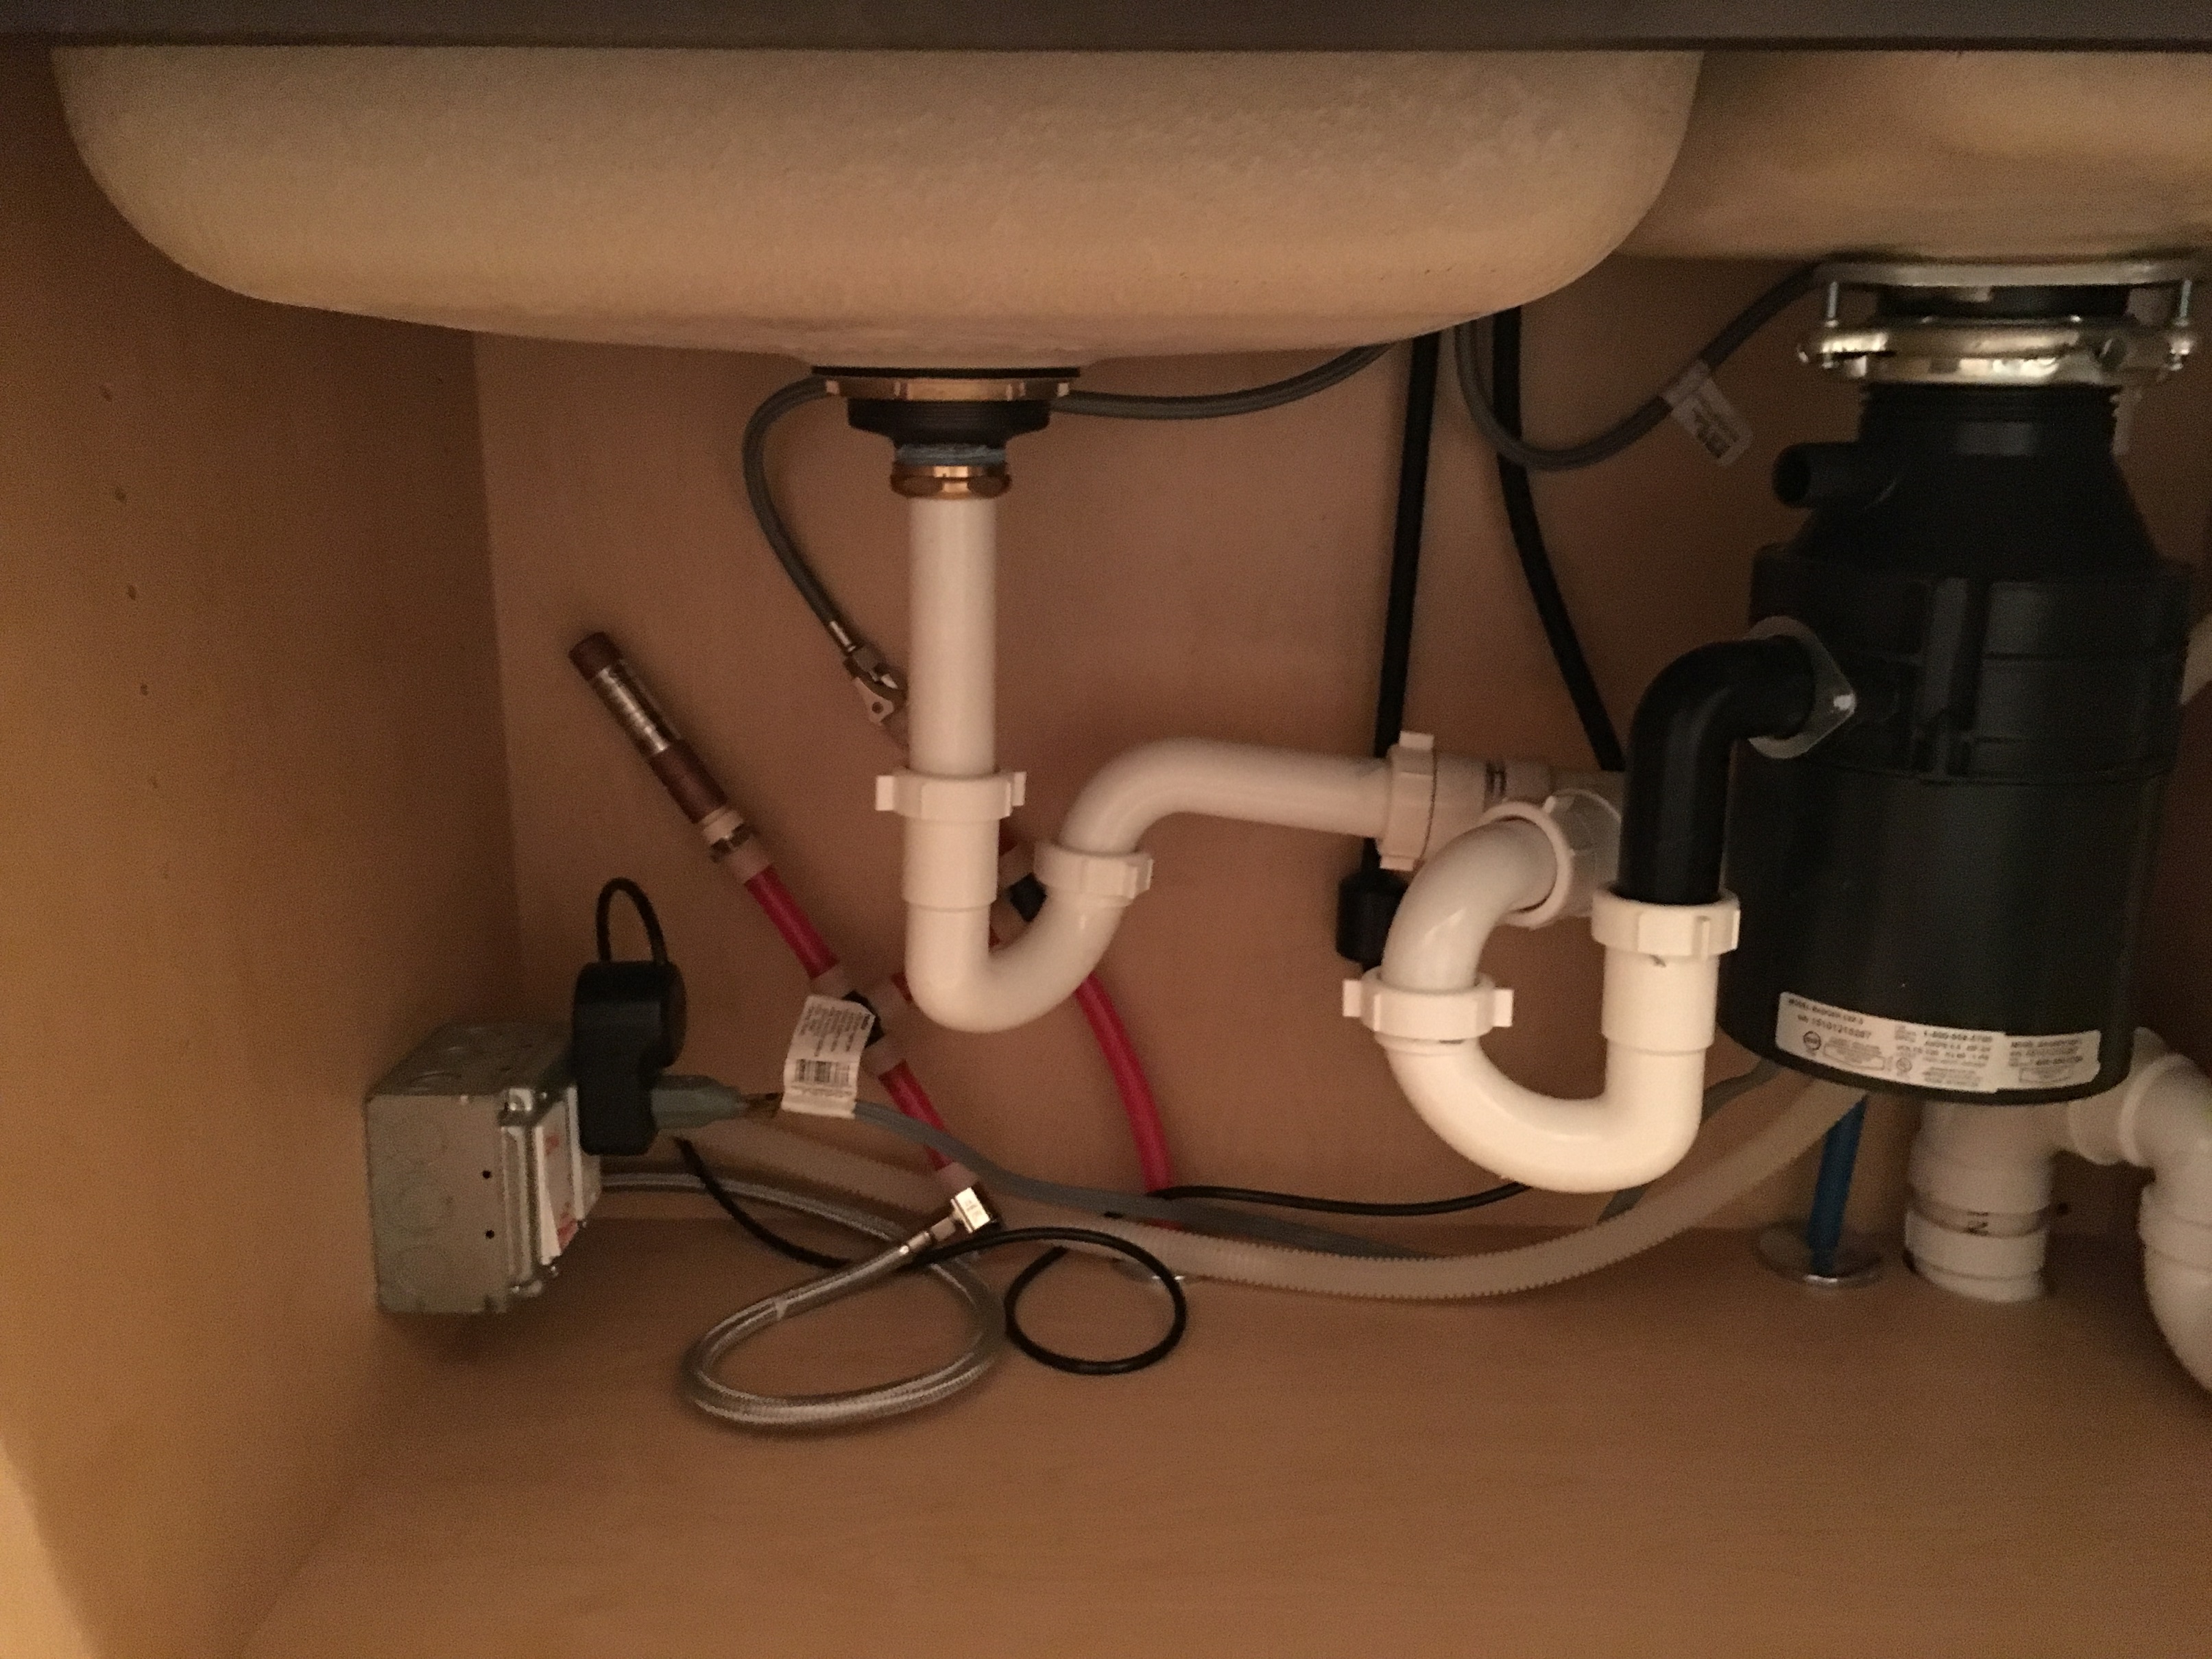 Sewer Gas Smell From Kitchen Sink Plumbing Issue